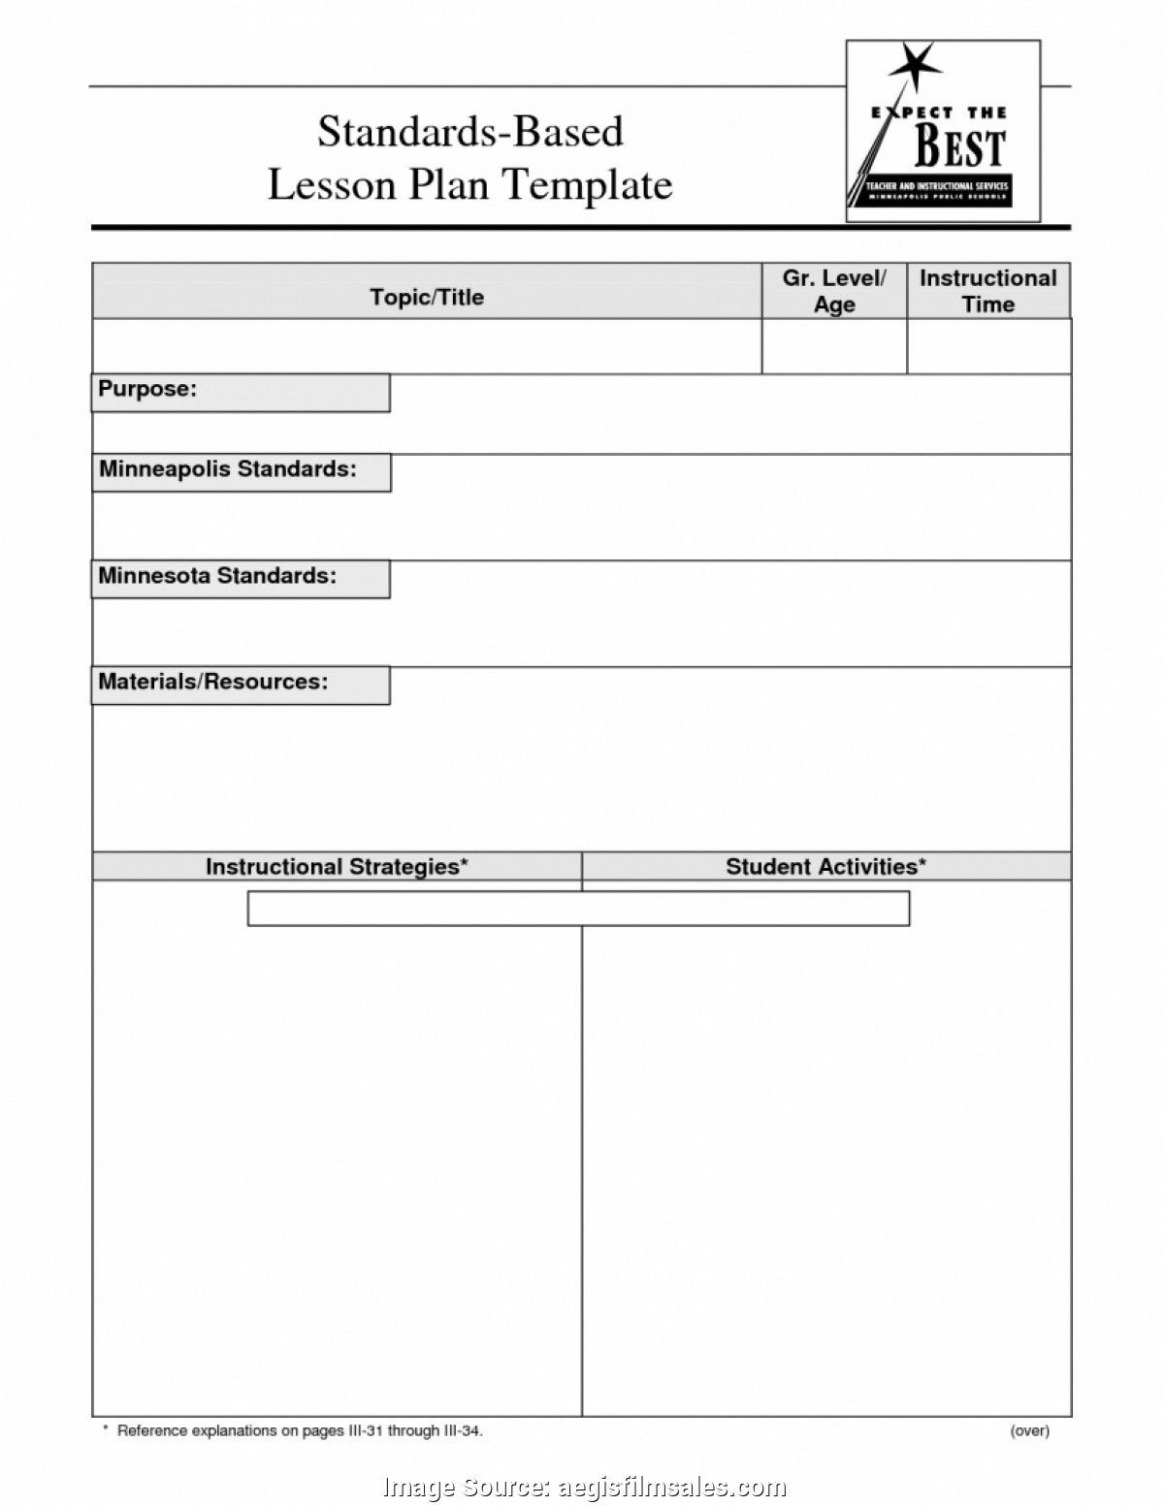 Free Standards Based Lesson Plan Template Word